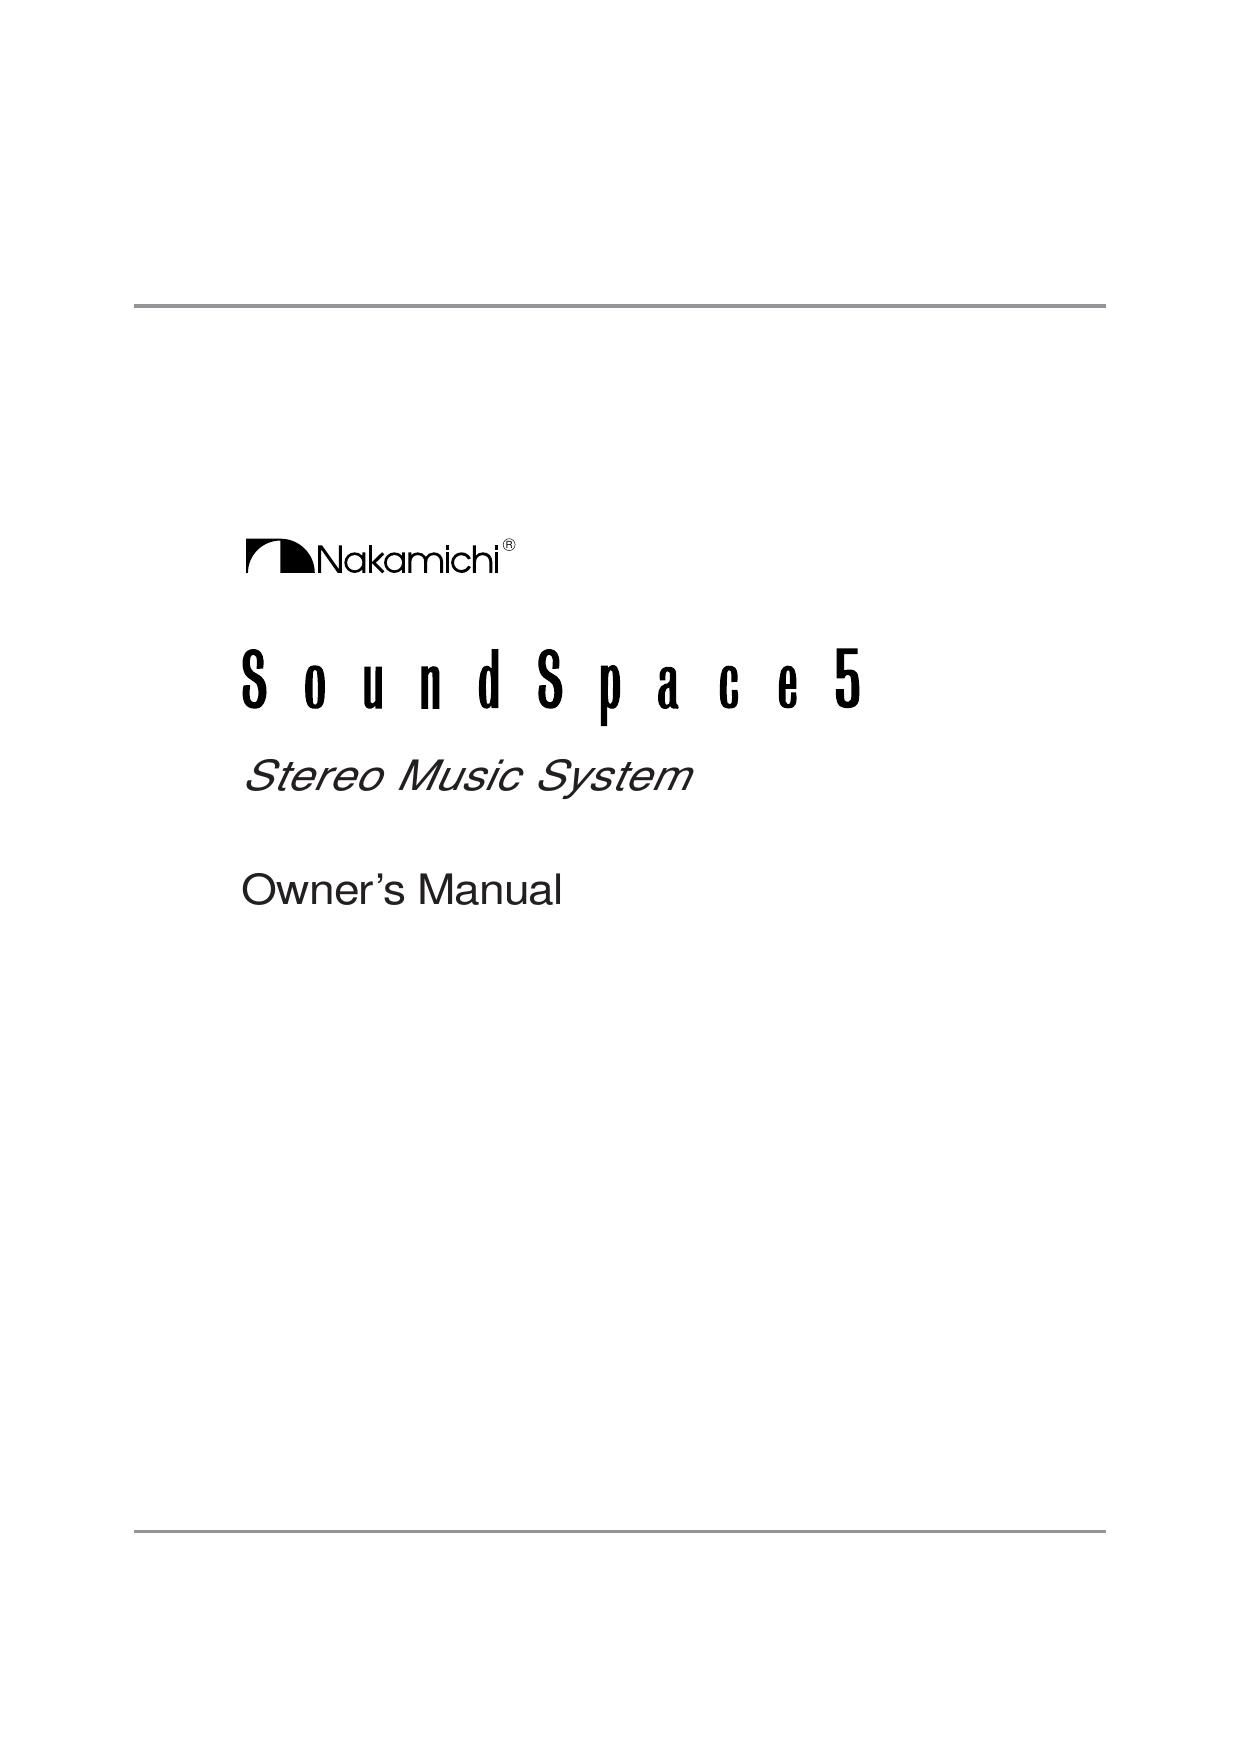 Nakamichi Sound Space 5 Owners Manual